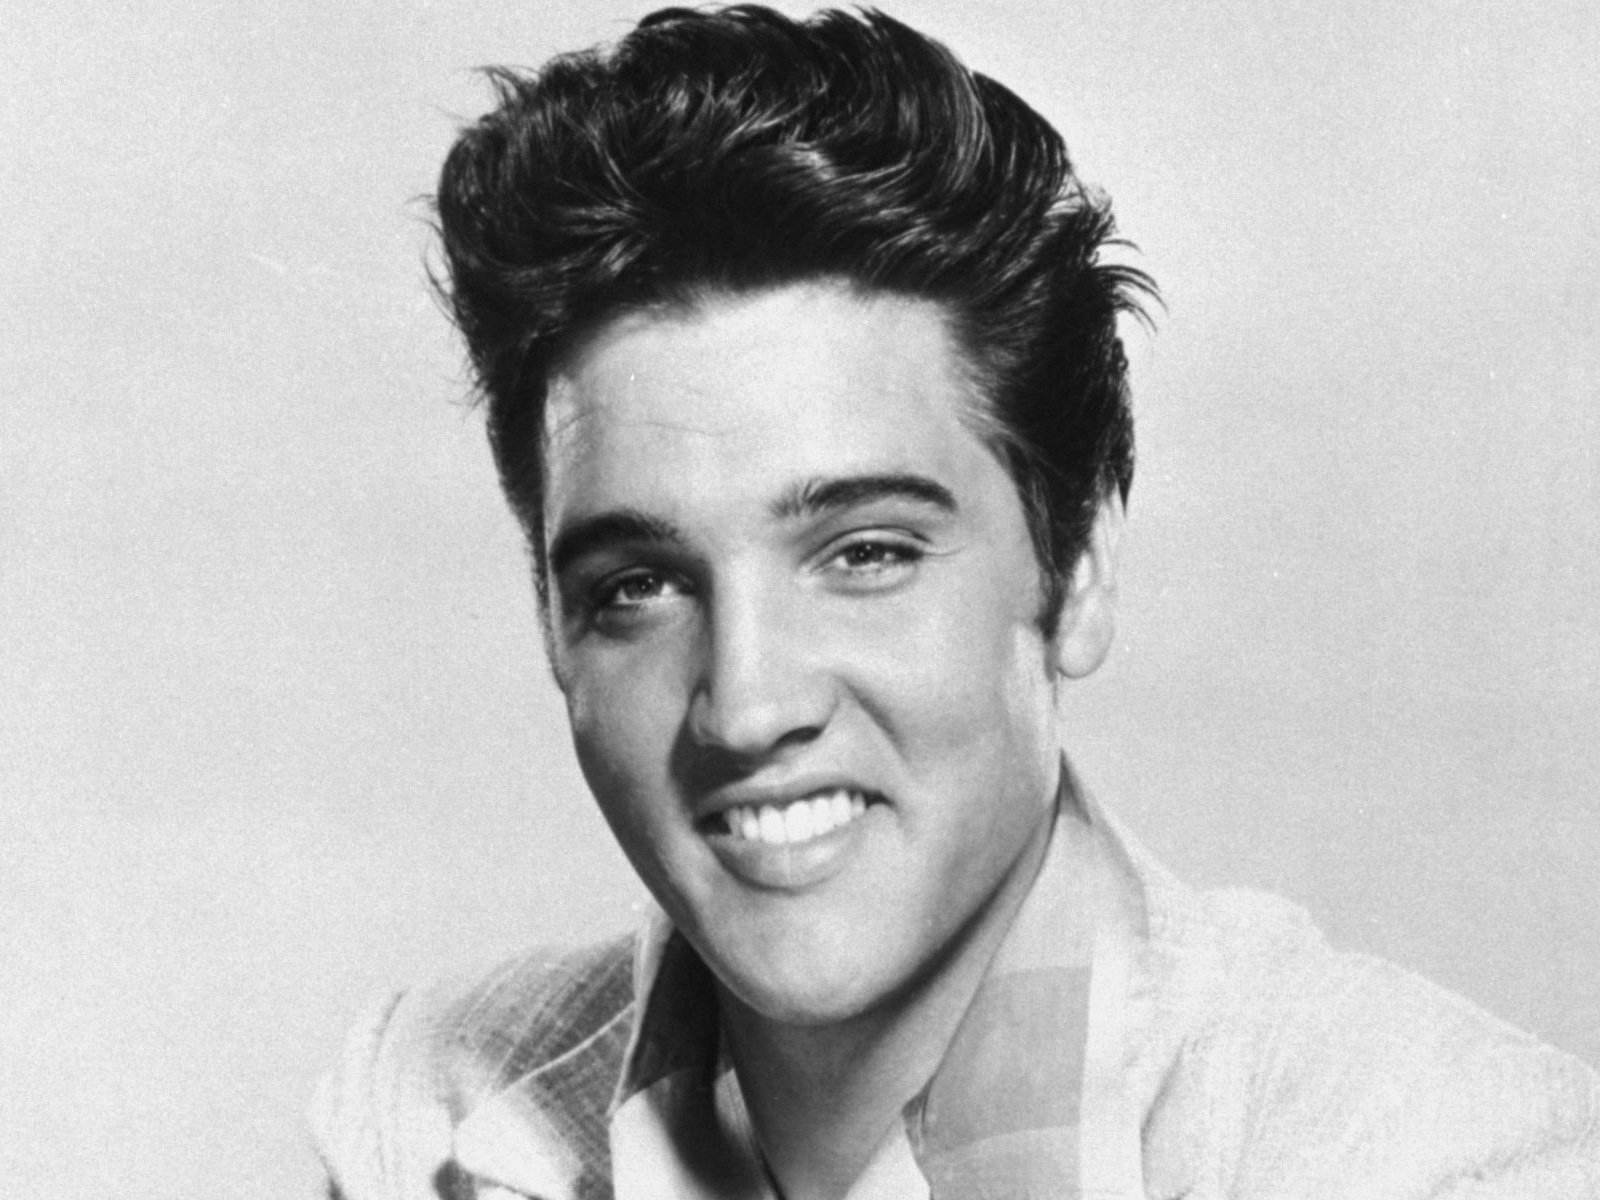 No One’s Got a Perfect Score on This General Knowledge Quiz (feat. Elvis Presley) — Can You? elvis presley